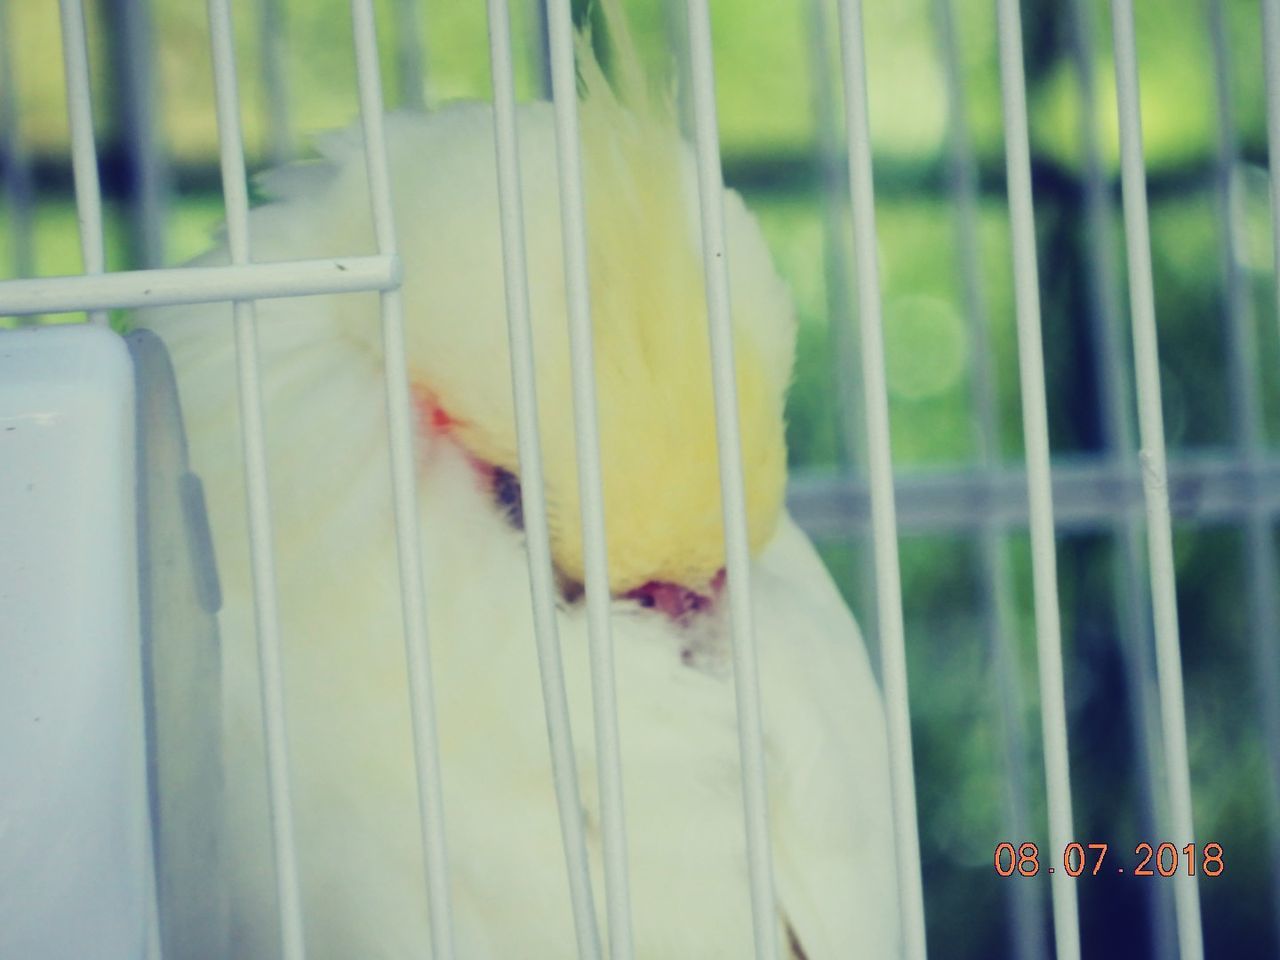 animal themes, animal, vertebrate, one animal, close-up, yellow, focus on foreground, animal wildlife, no people, animals in captivity, cage, animals in the wild, bird, nature, day, pets, domestic, outdoors, metal, growth